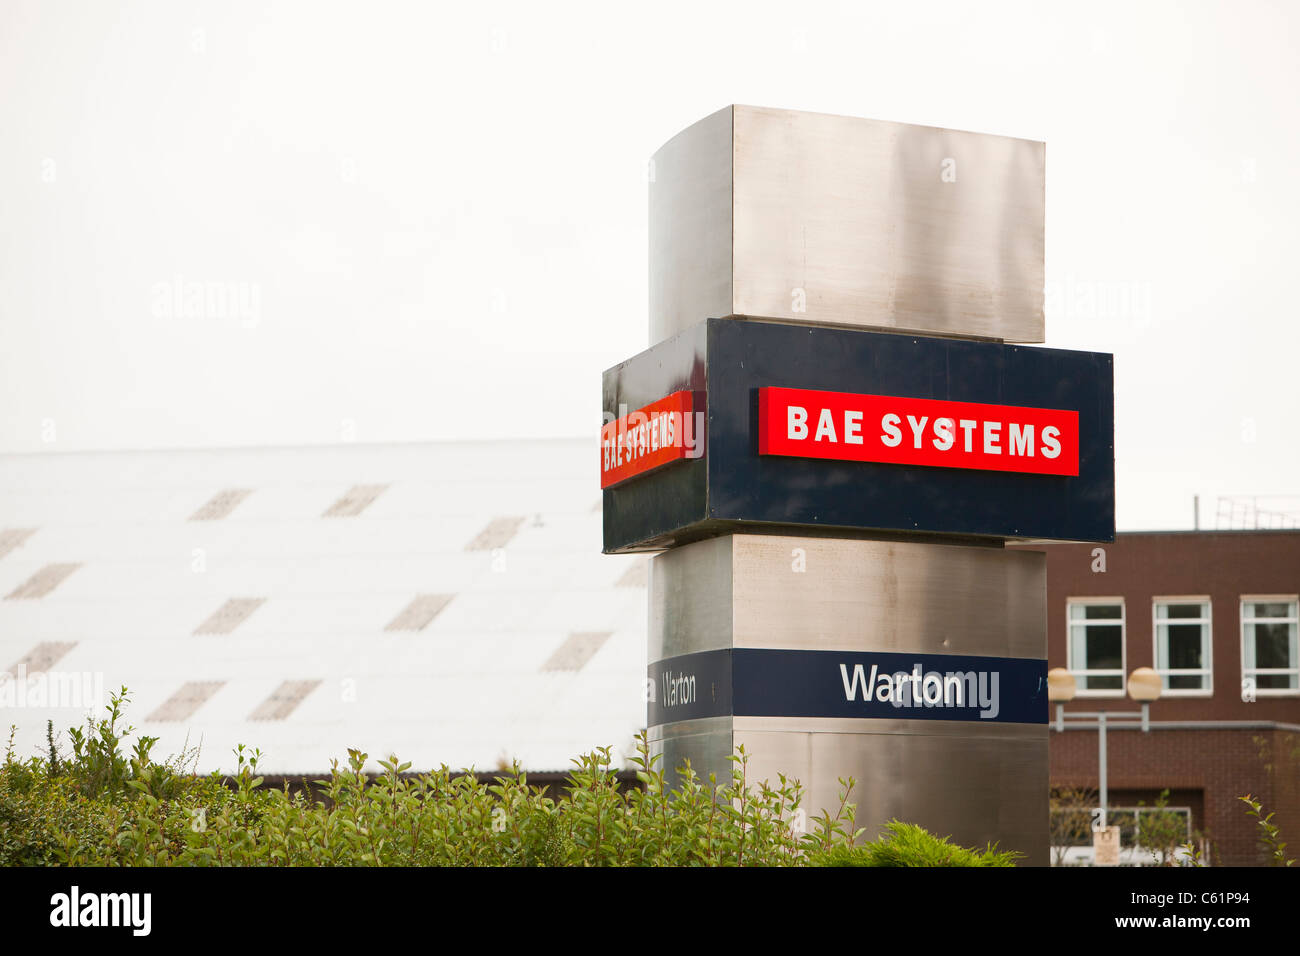 BAE systems plant at Warton in Lancashire, UK. Stock Photo